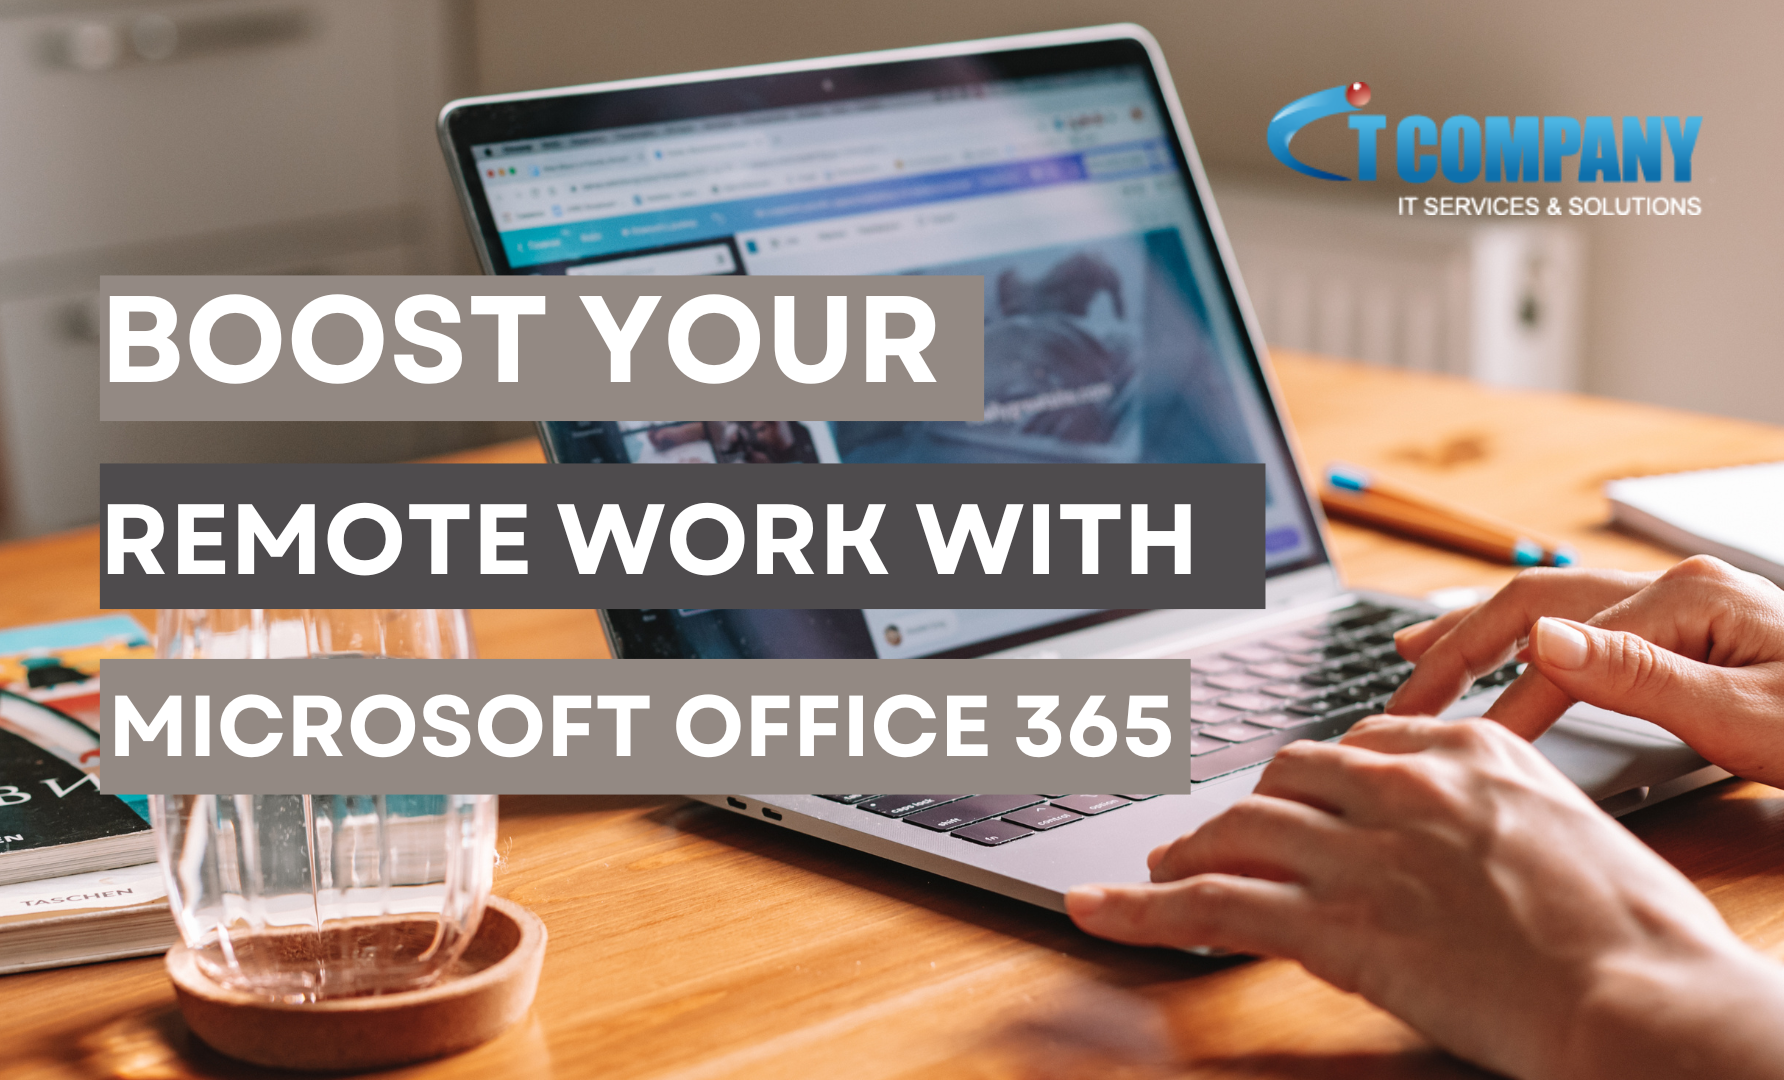 Benefits of Using Microsoft Office 365 for Remote Work